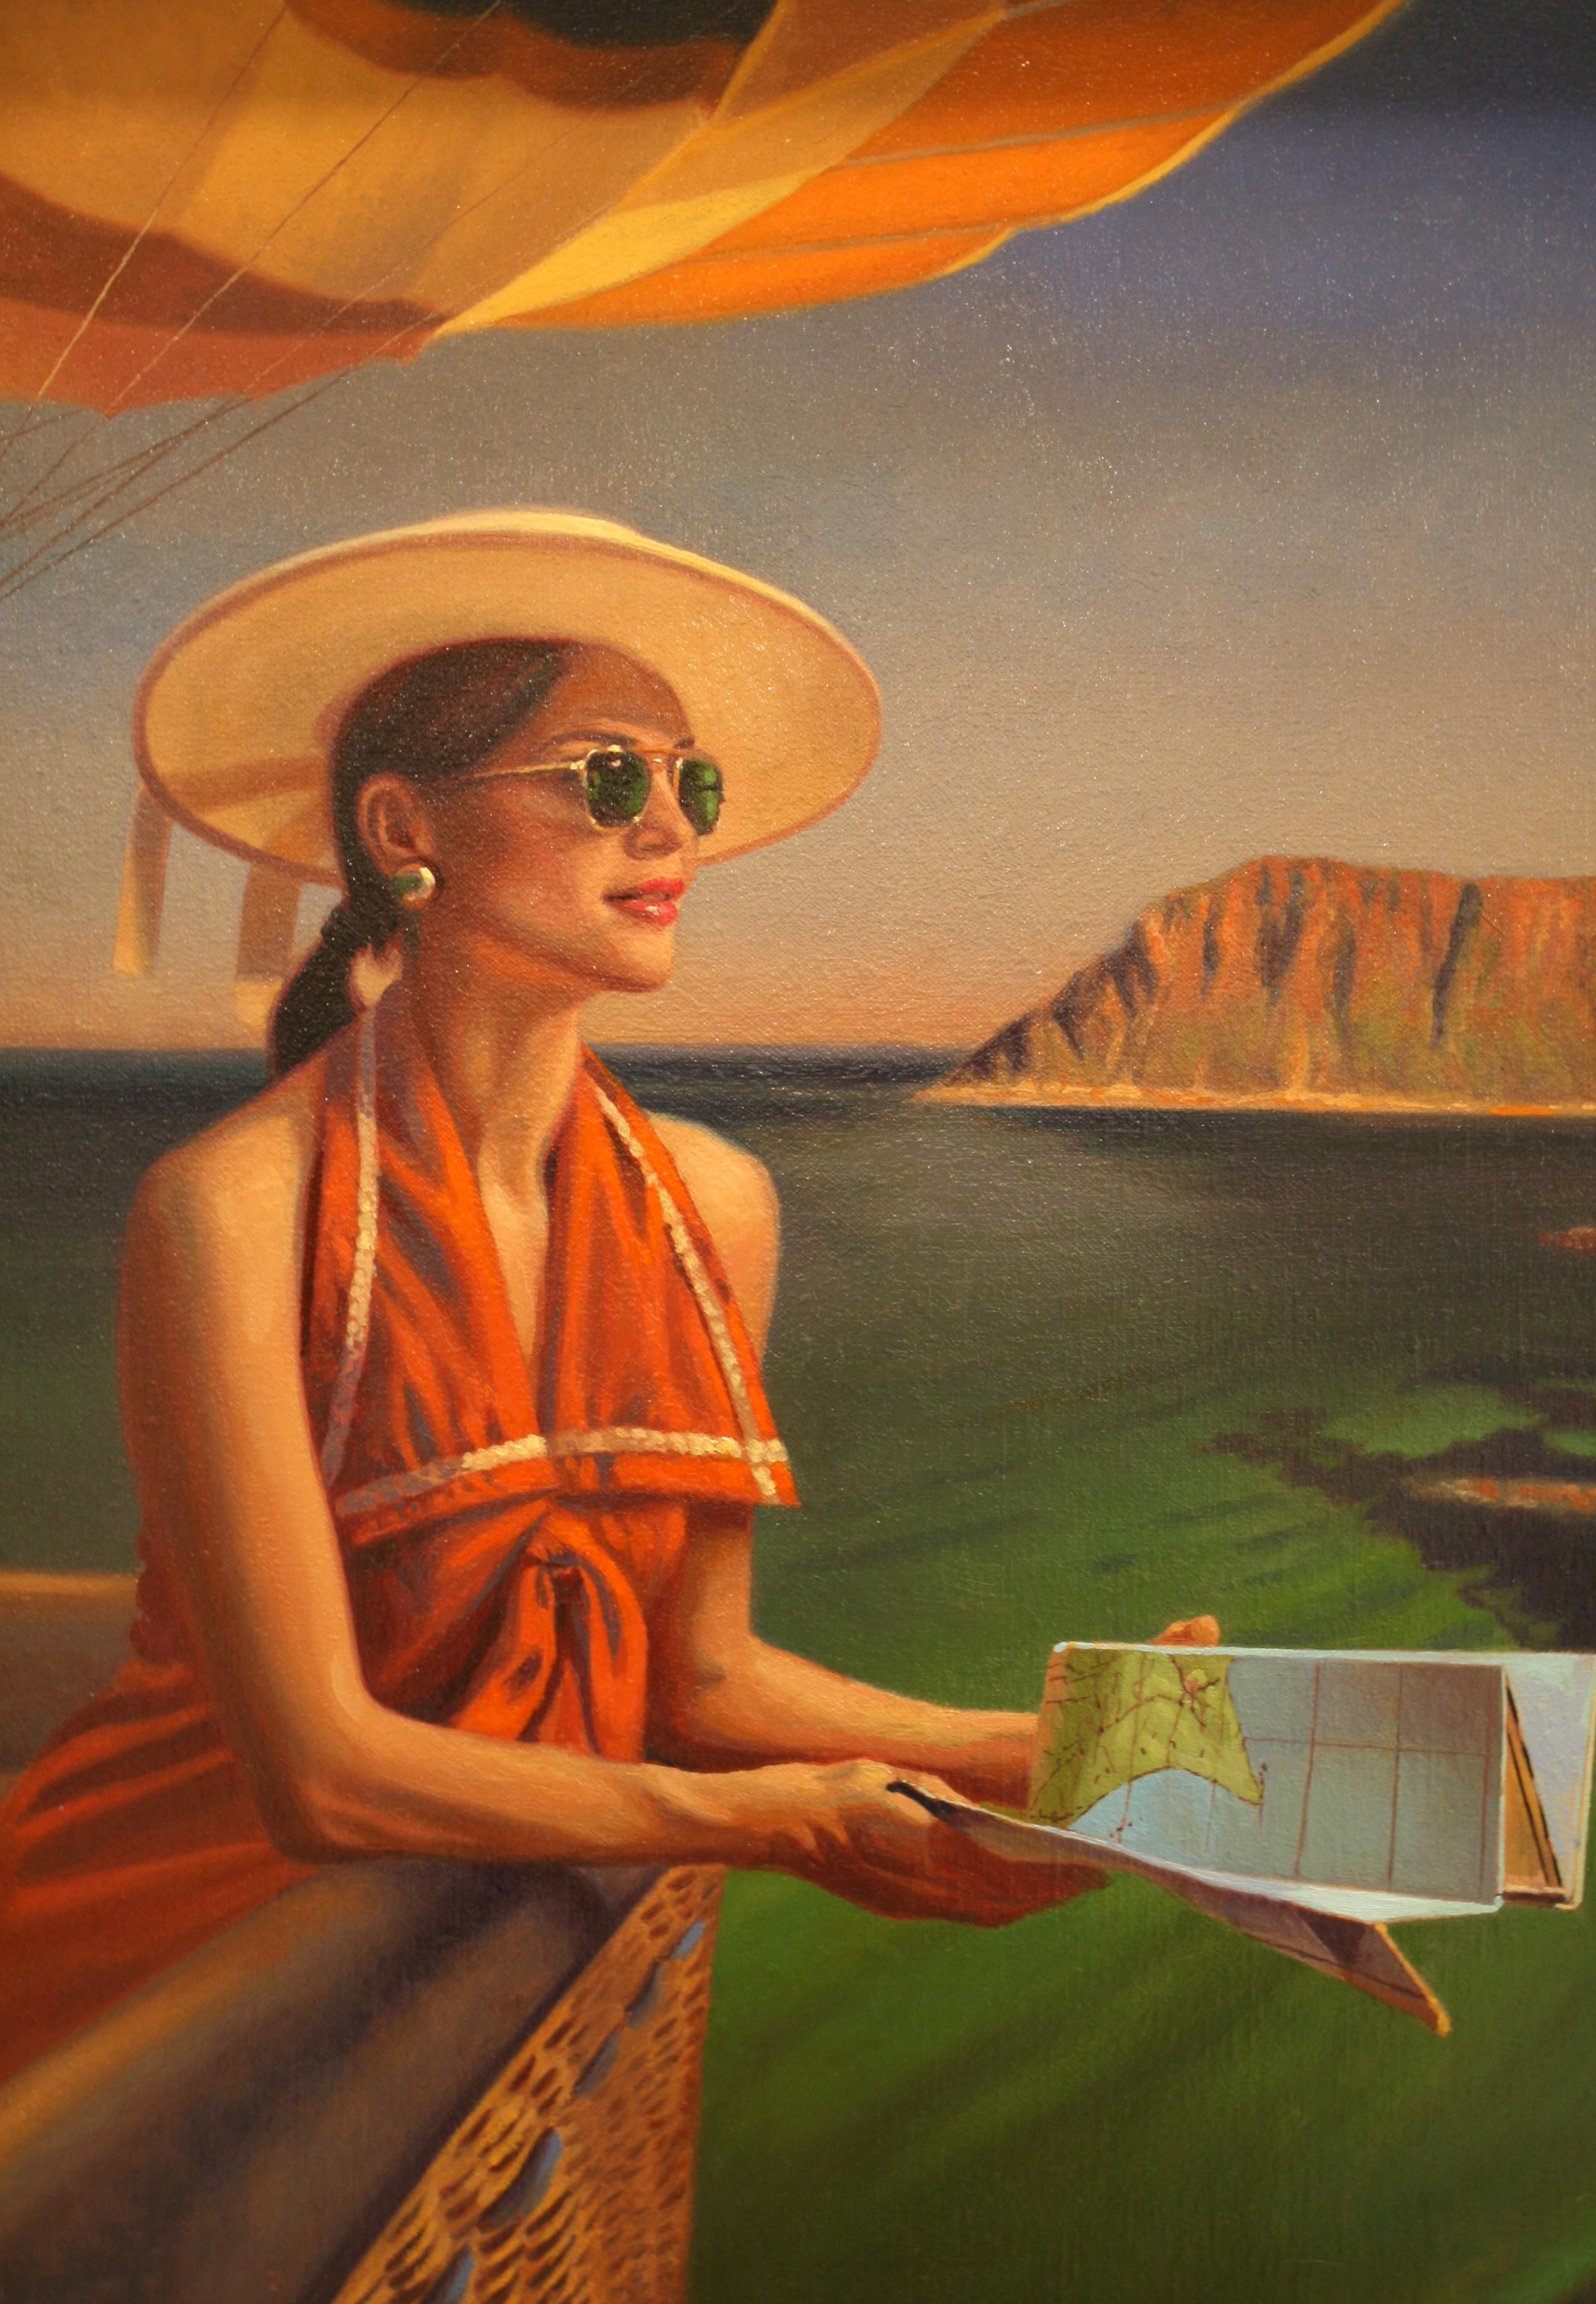 Peregrine Heathcote’s paintings conjure a world of intoxicating glamour and intrigue, slipping across the boundaries of time to fuse iconic pre-war design with modern conceptions of beauty and silverscreen-era romance.

The images could depict a